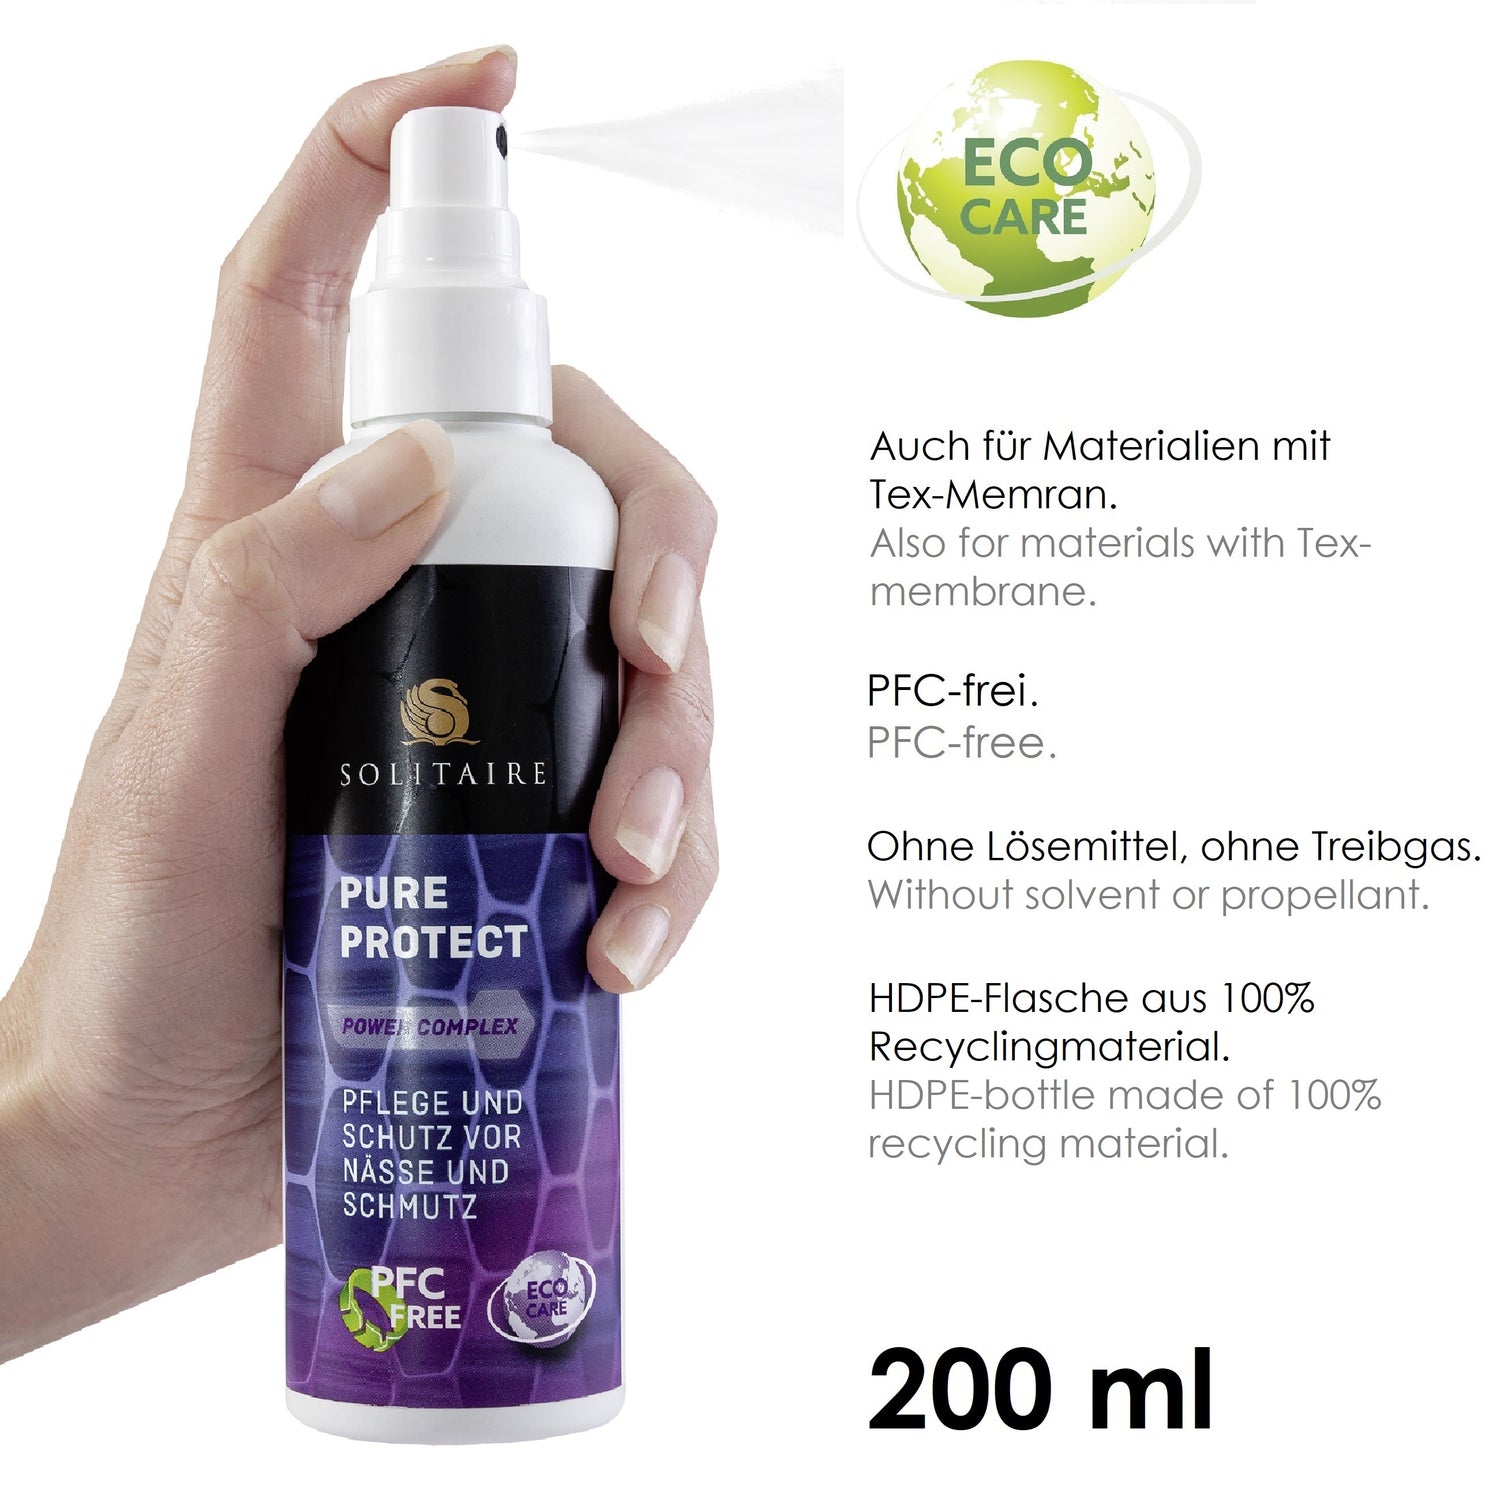 Solitaire Ecco Care Pure Protect – Schuh Huber